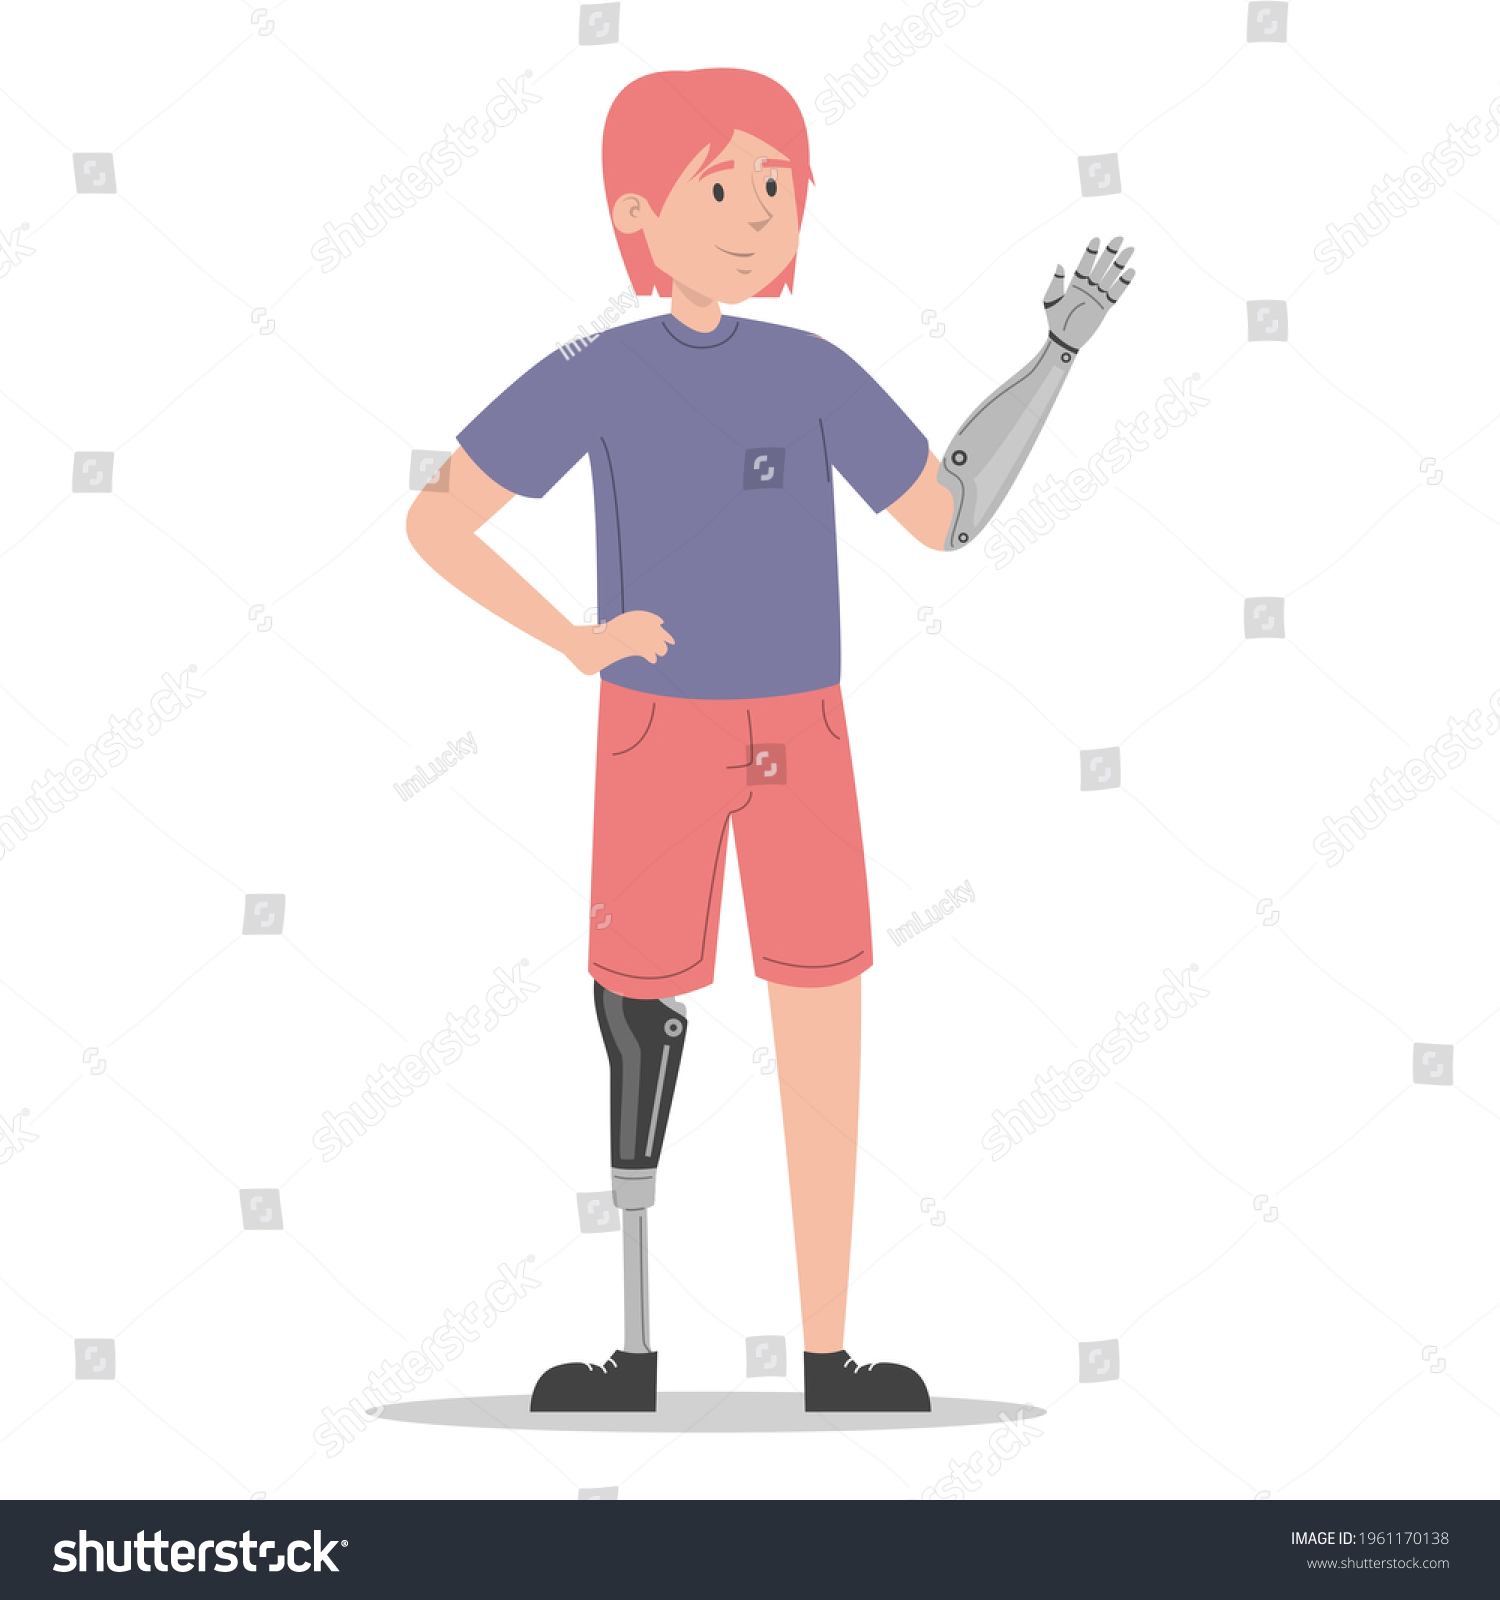 SVG of Happy young man with prosthetic leg and arm vector isolated. Illustration of young adult wearing a prosthesis. Handicapped person, male character with artificial limbs. svg